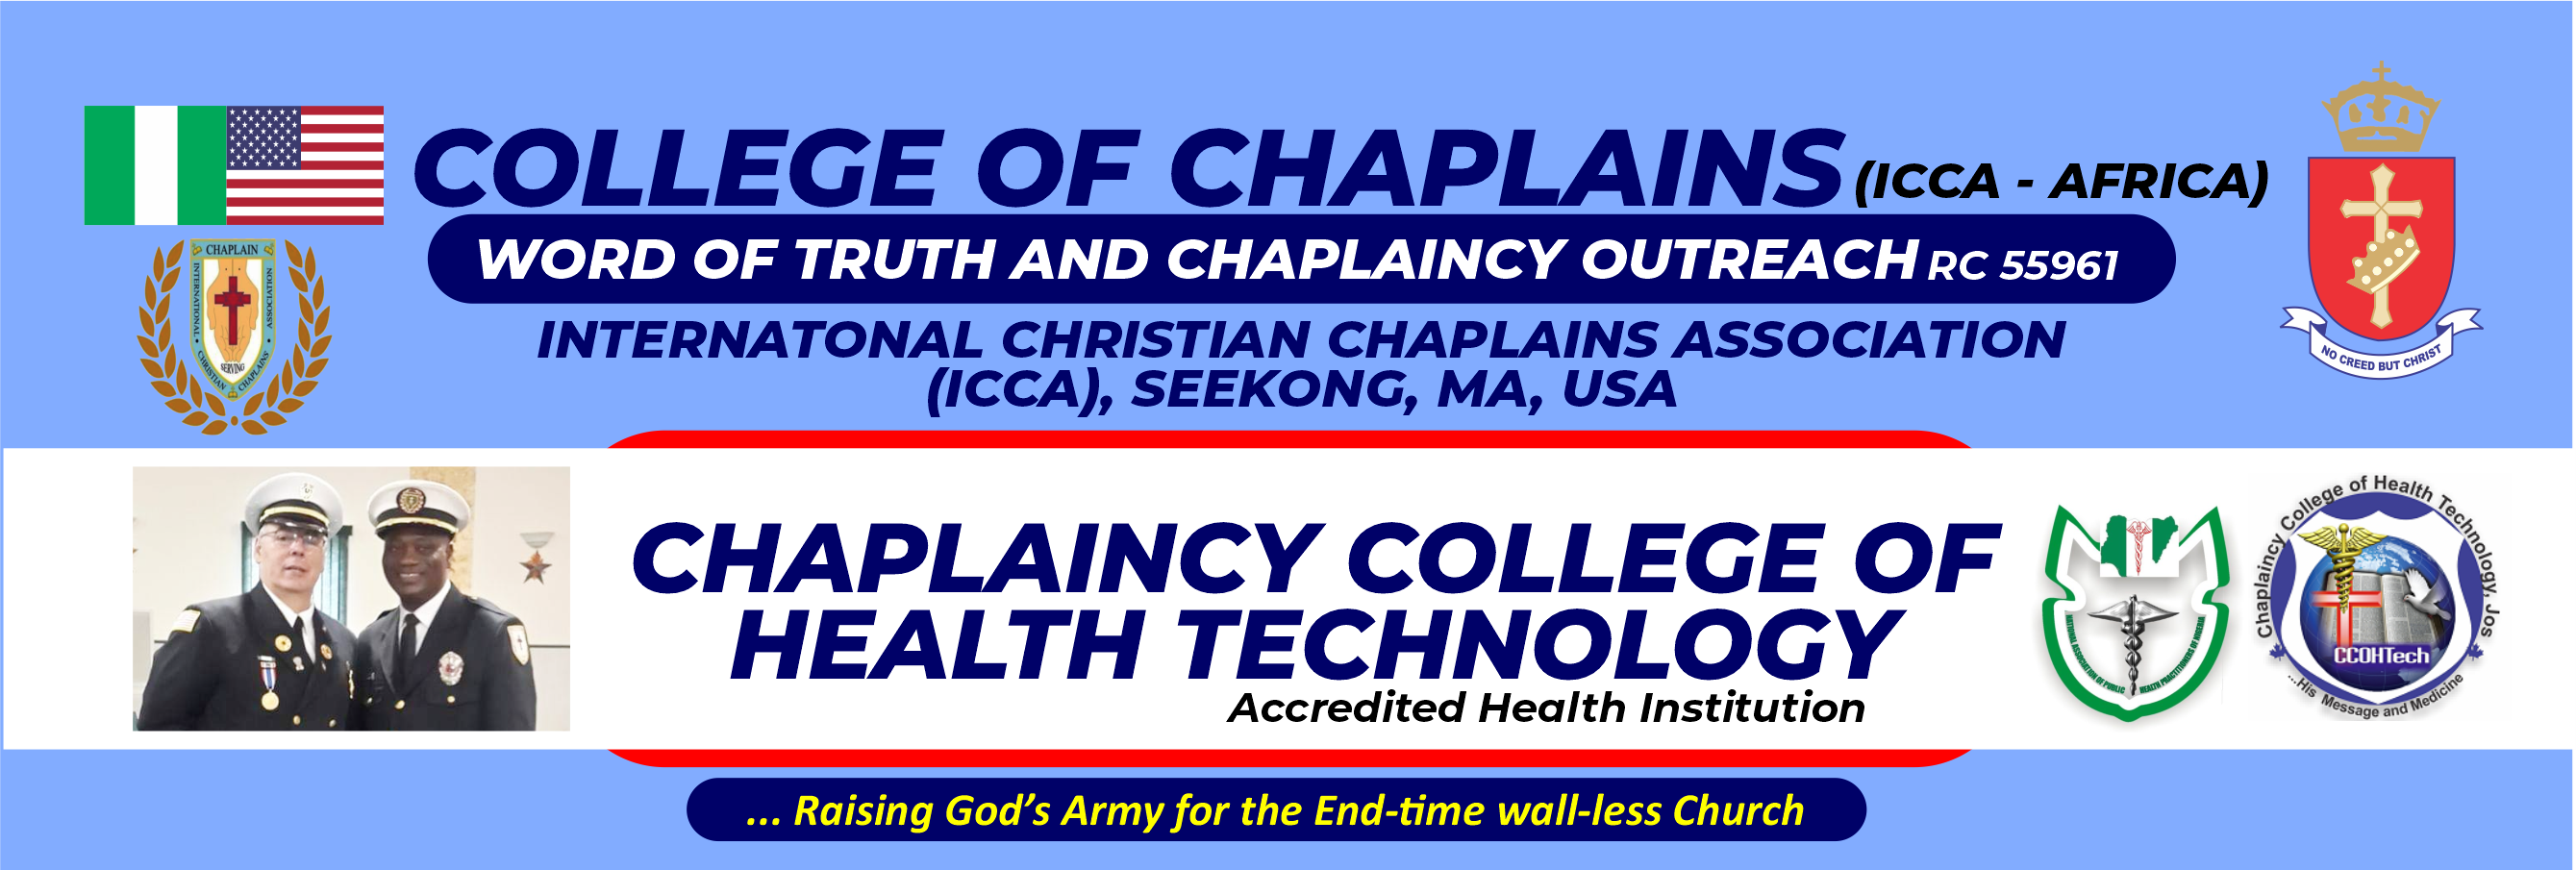 College of Chaplains